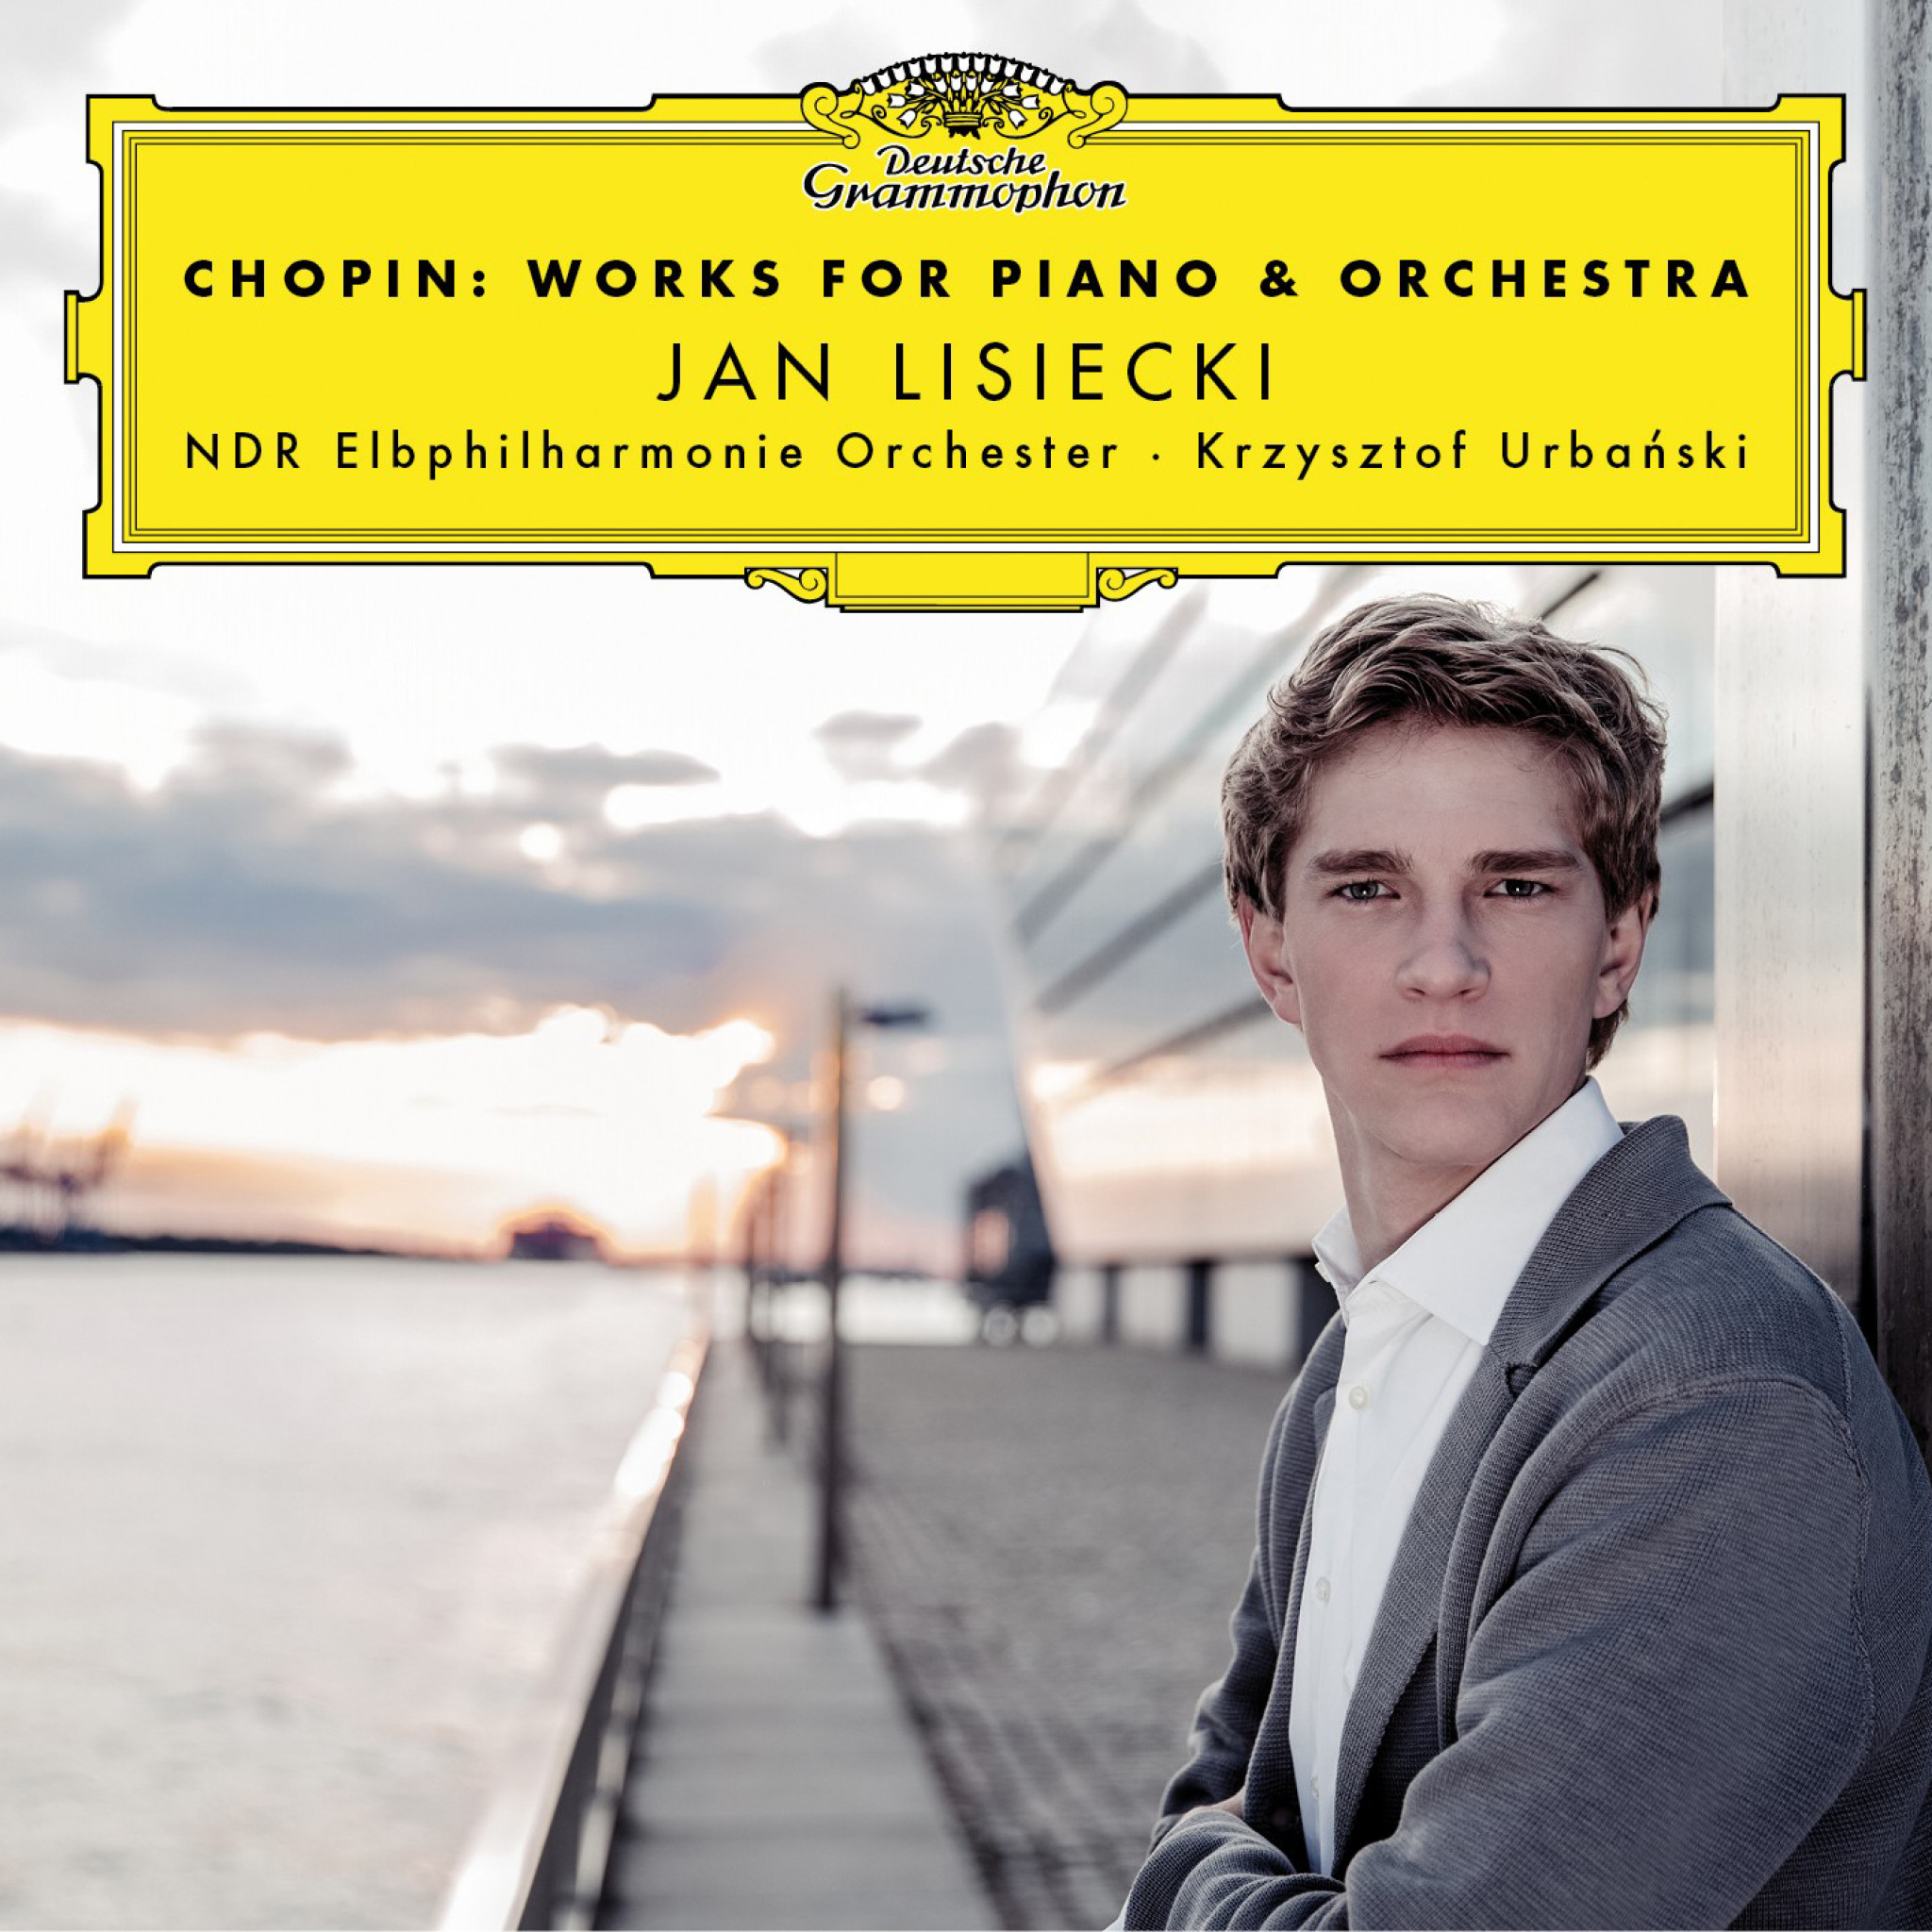 Jan Lisiecki - Chopin: Works for Piano & Orchestra